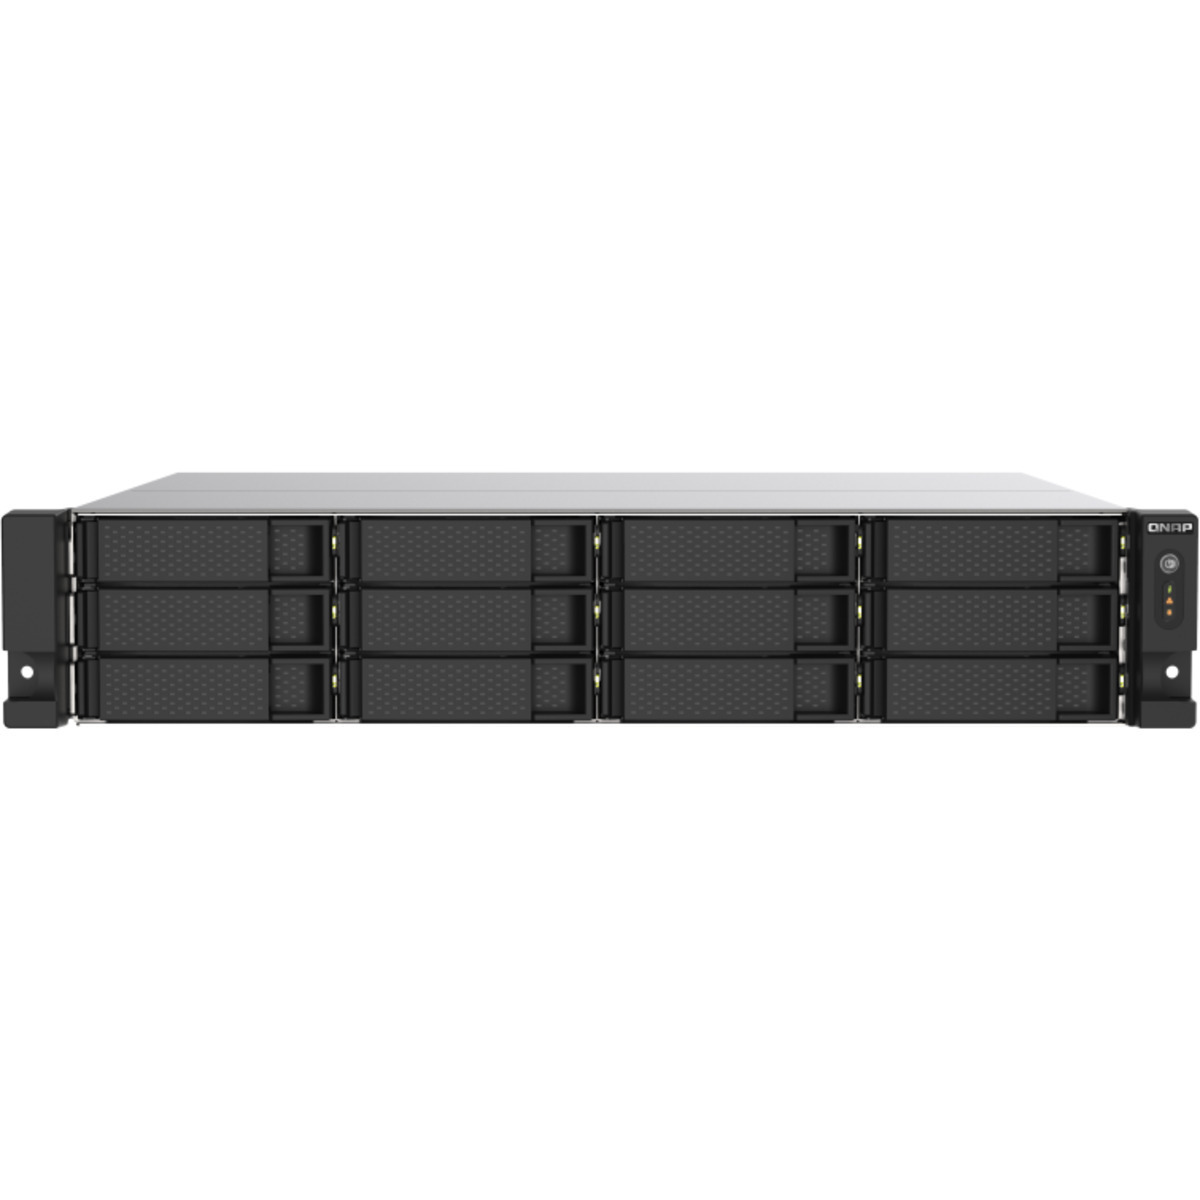 QNAP TS-1273AU-RP 216tb 12-Bay RackMount Multimedia / Power User / Business NAS - Network Attached Storage Device 9x24tb Western Digital Red Pro WD240KFGX 3.5 7200rpm SATA 6Gb/s HDD NAS Class Drives Installed - Burn-In Tested - FREE RAM UPGRADE TS-1273AU-RP